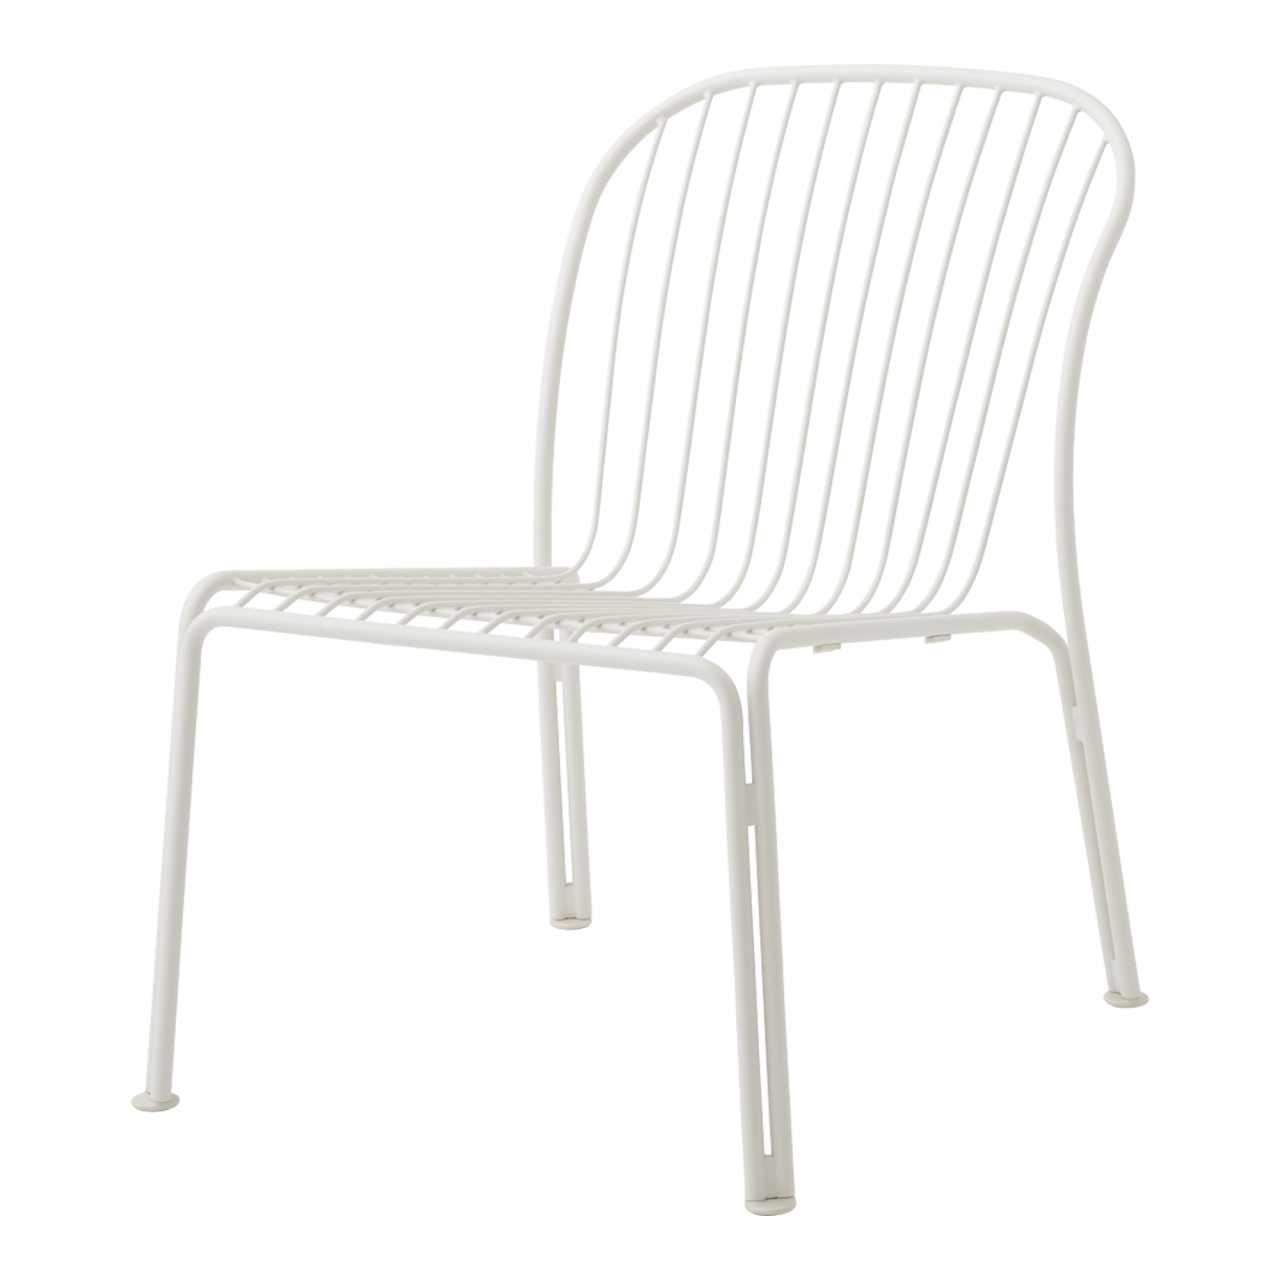 Thorvald SC100 Lounge Chair Sessel